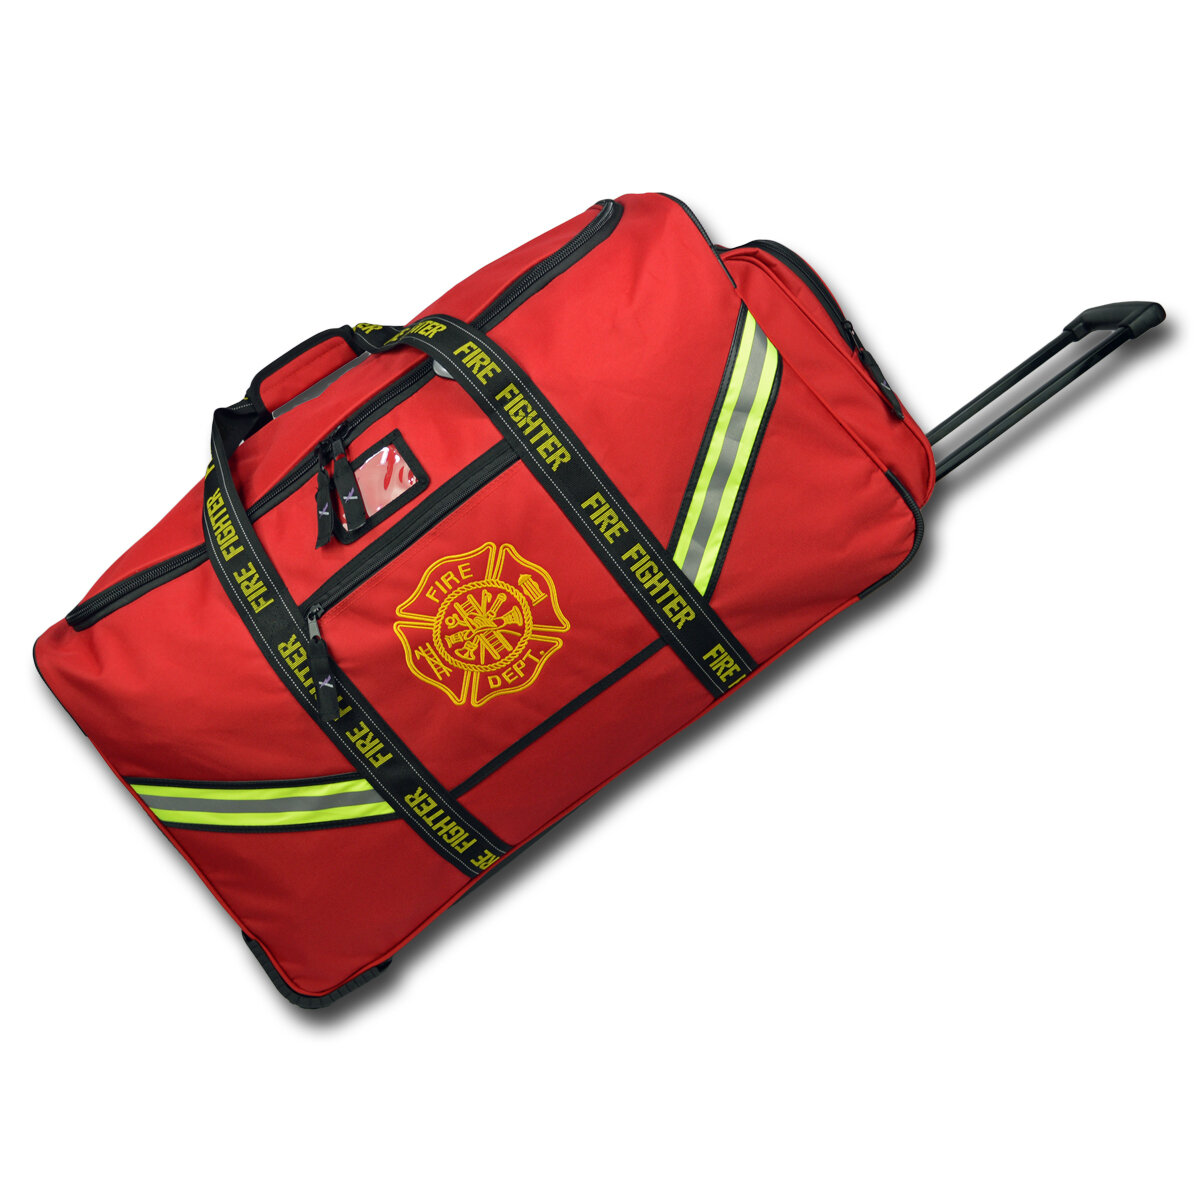 Premium Rolling Turnout Gear Bag; Luggage Style w/ Wheels, Reinforced Bottom & Retractable Handle; Now With Mask Bag & Gear Hooks